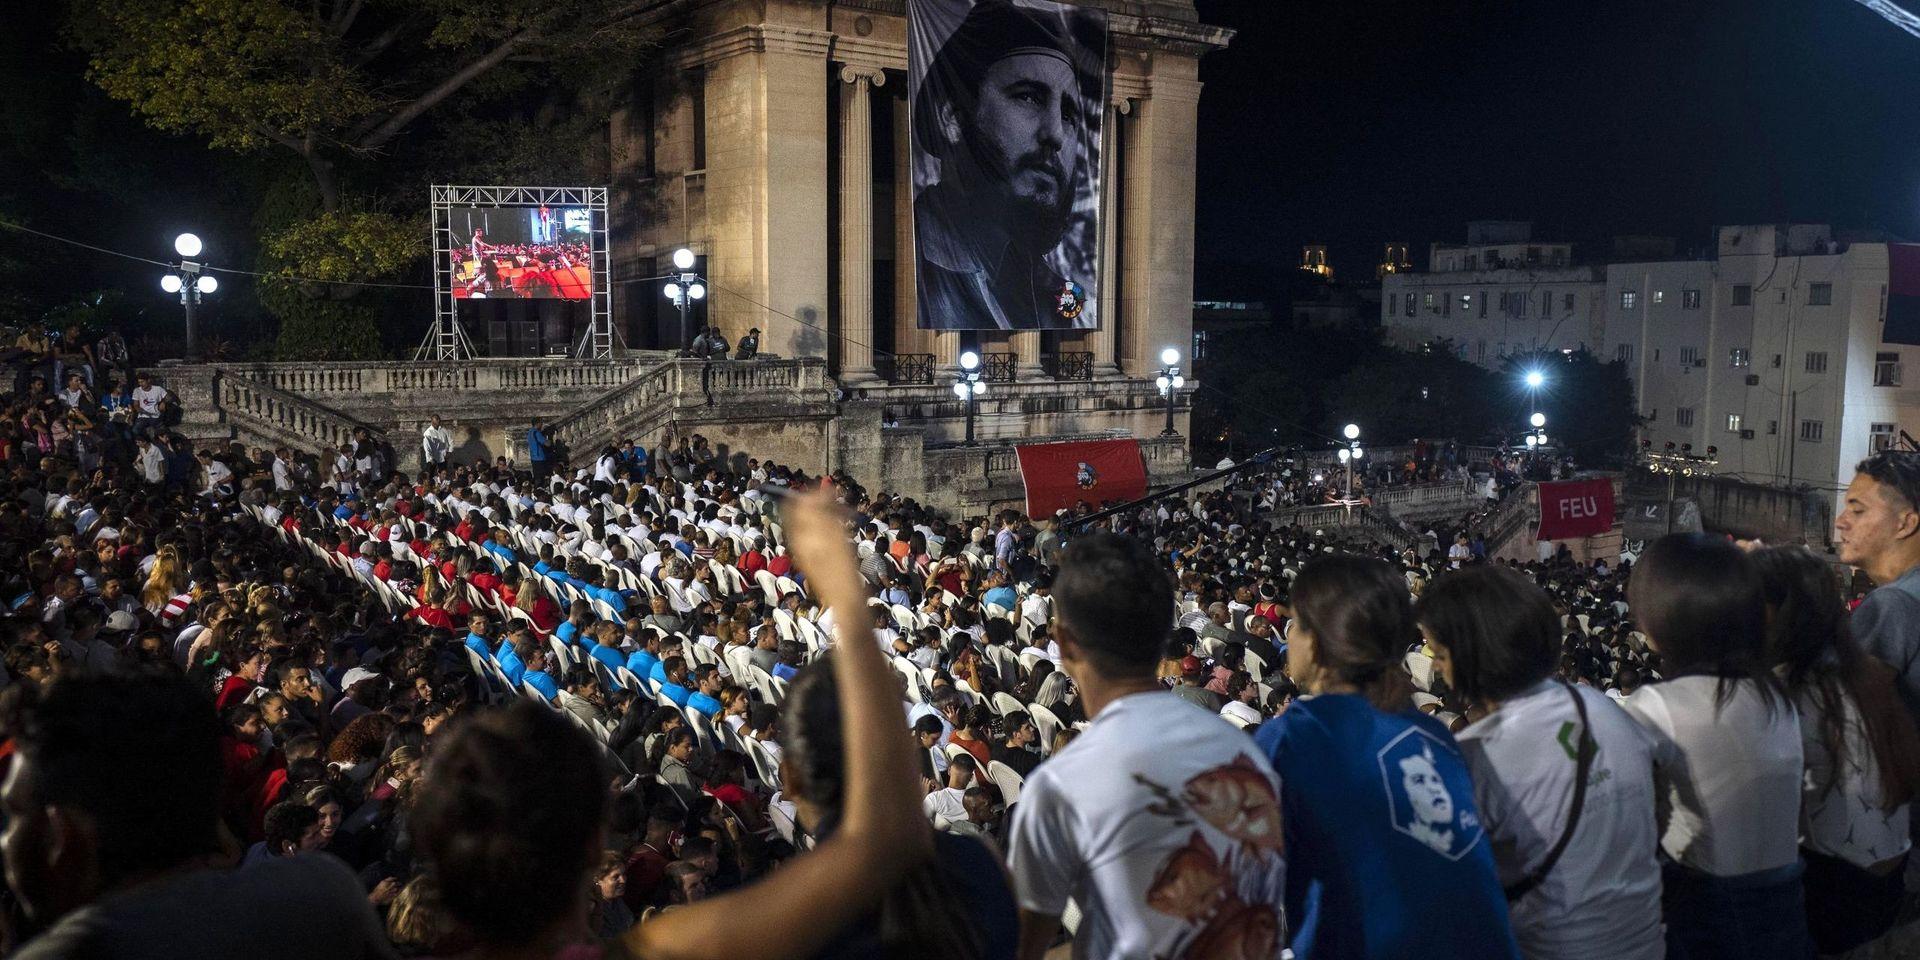 People gather at Havana University for a memorial event commemorating the third anniversary of the death of the late Cuban leader Fidel Castro in Havana, Cuba, Monday, Nov. 25, 2019. Castro died at 90.